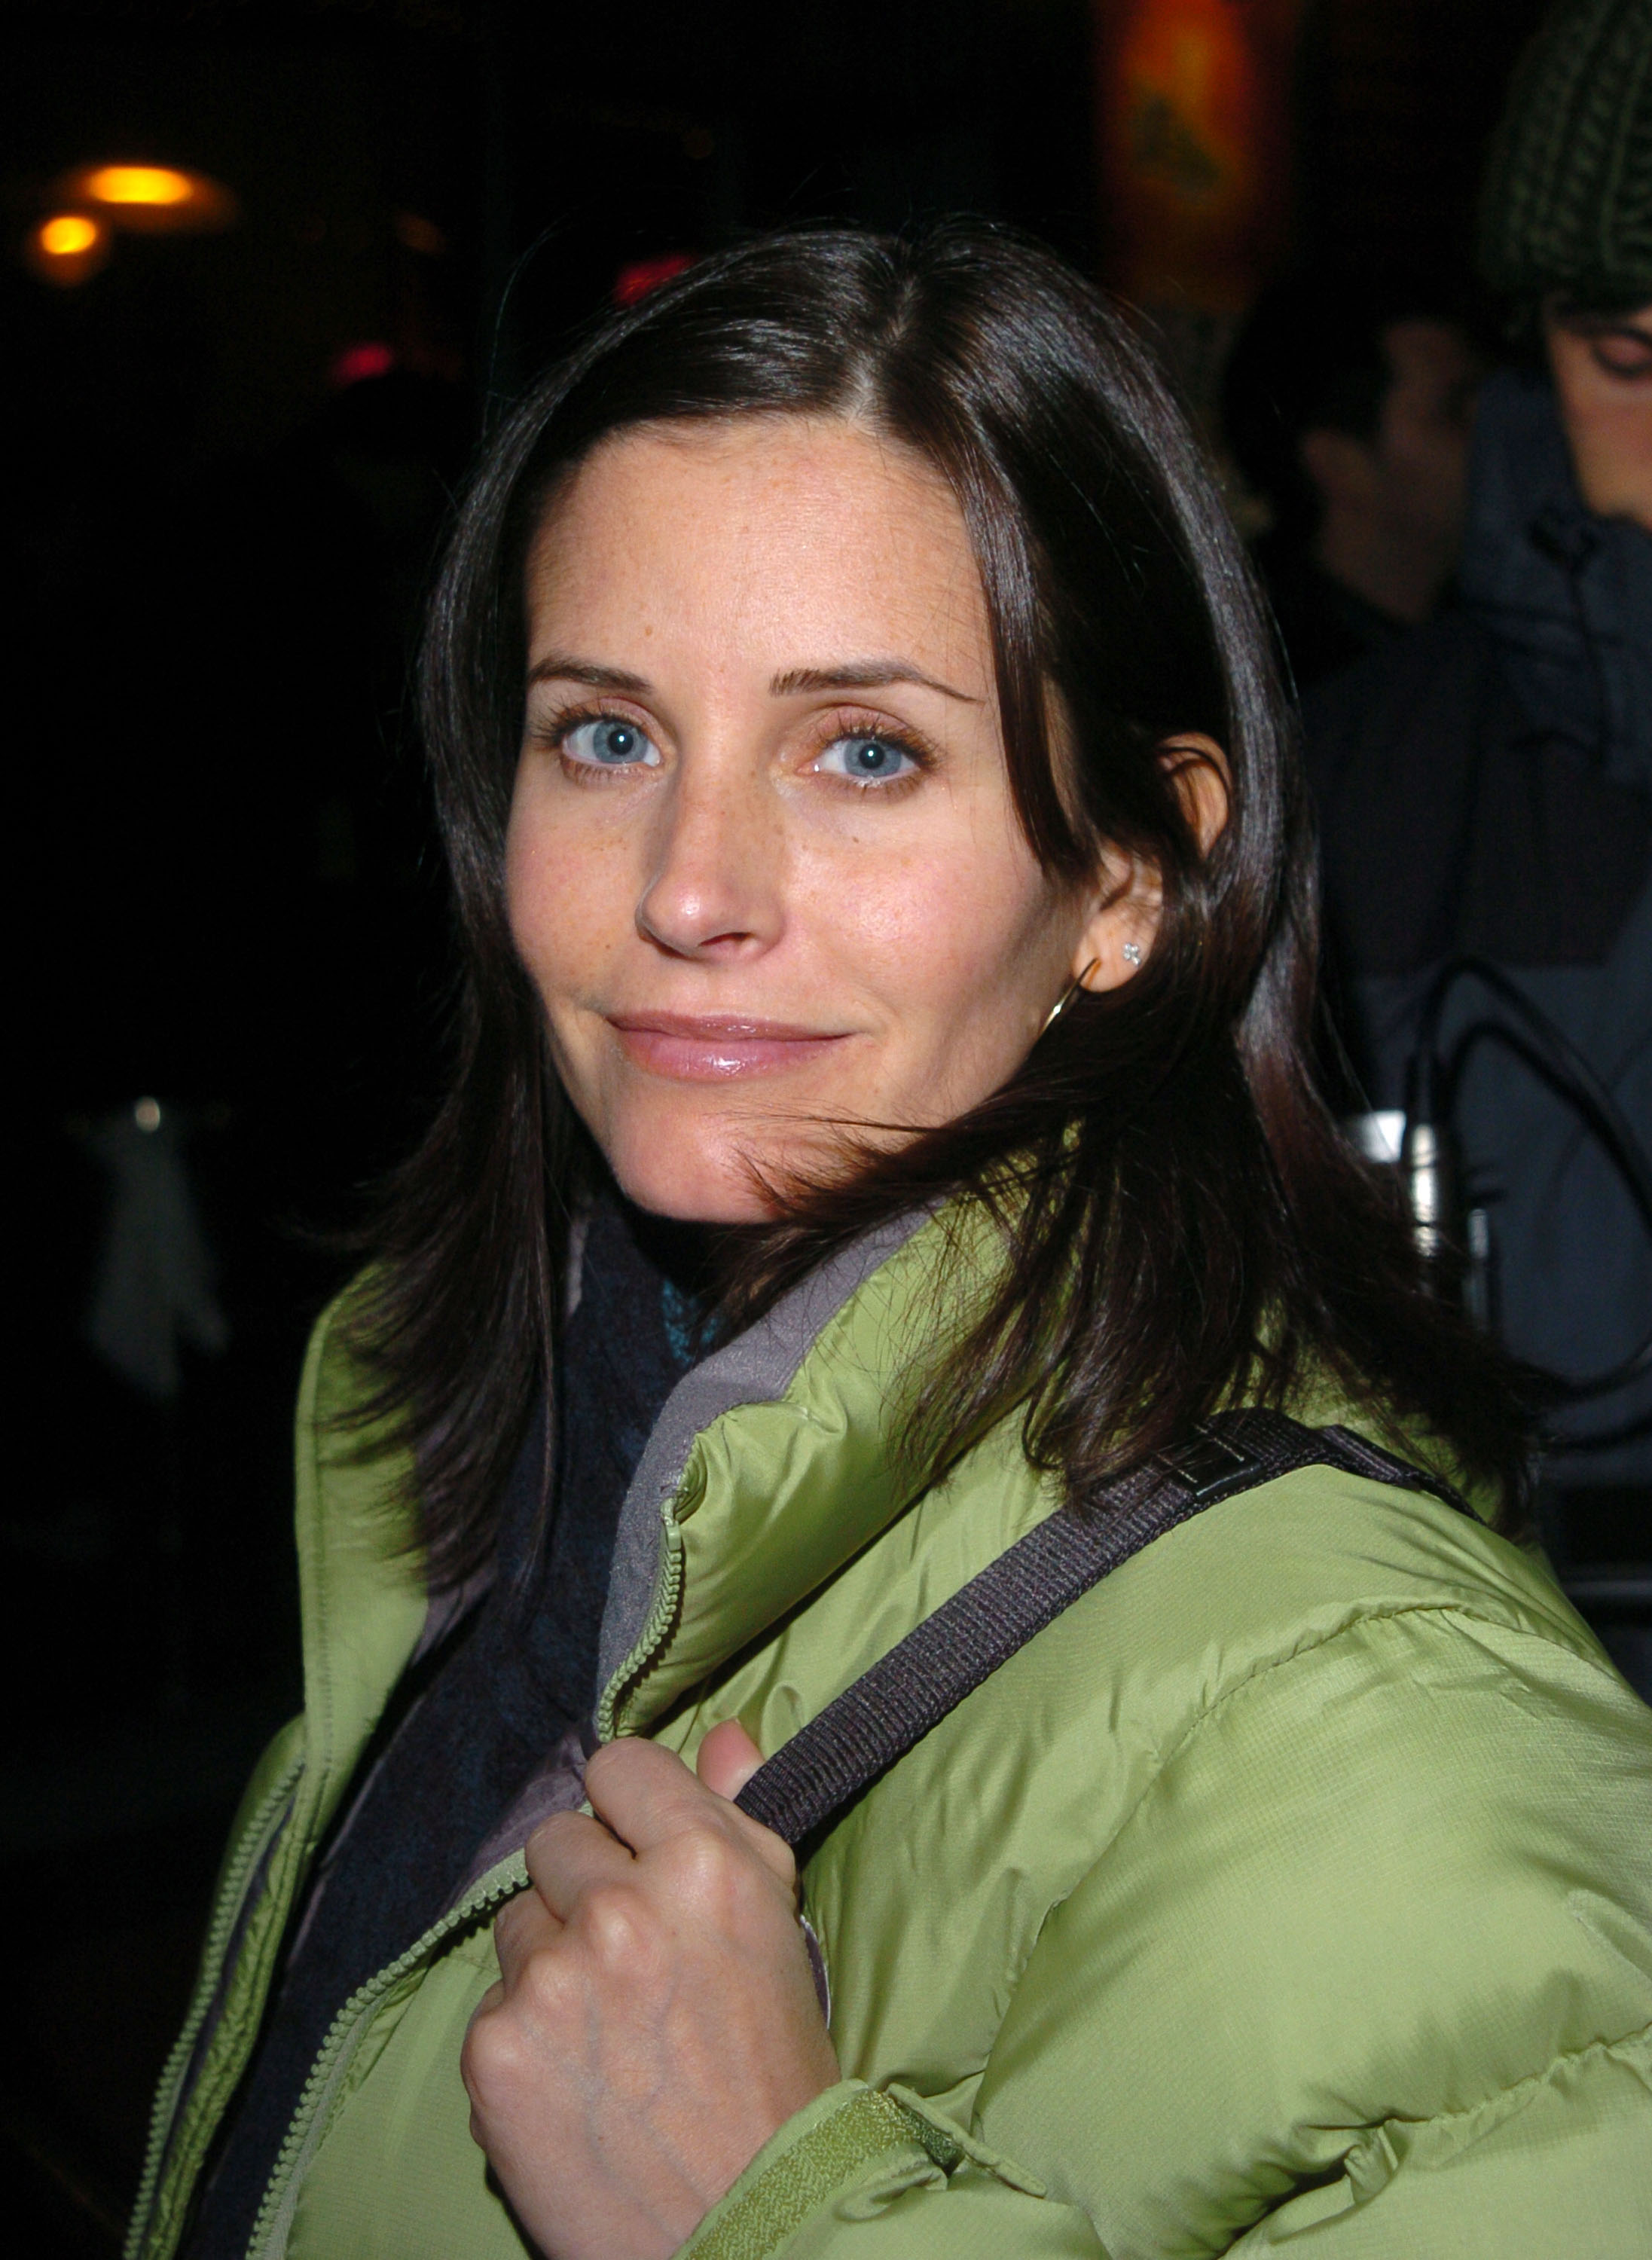 Courteney Cox Arquette during Park City - Cinetec/Diesel Party at Easy Street in Park City, Utah on January 18, 2004. | Source: Getty Images